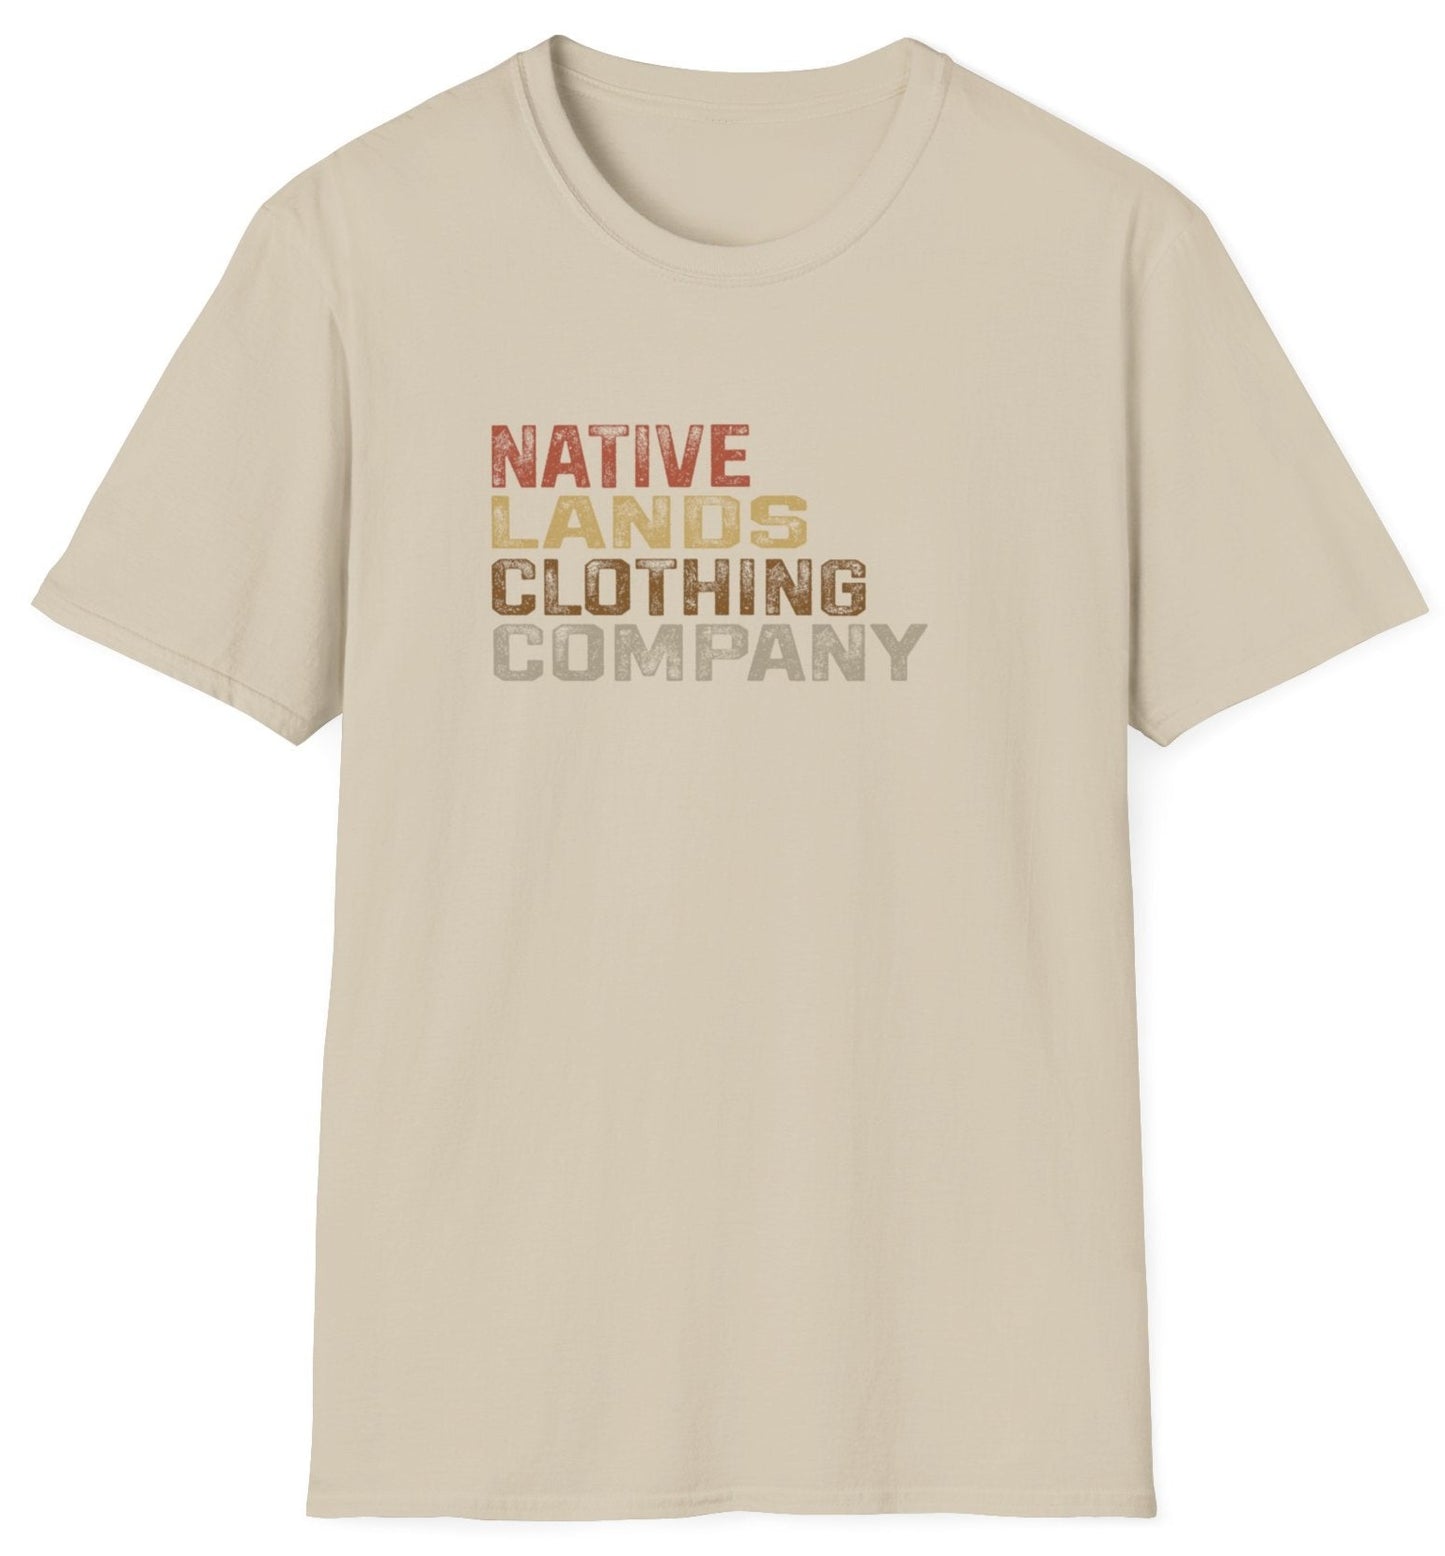 Native Lands Clothing Company Earth Shirt Baumwolle Indianer